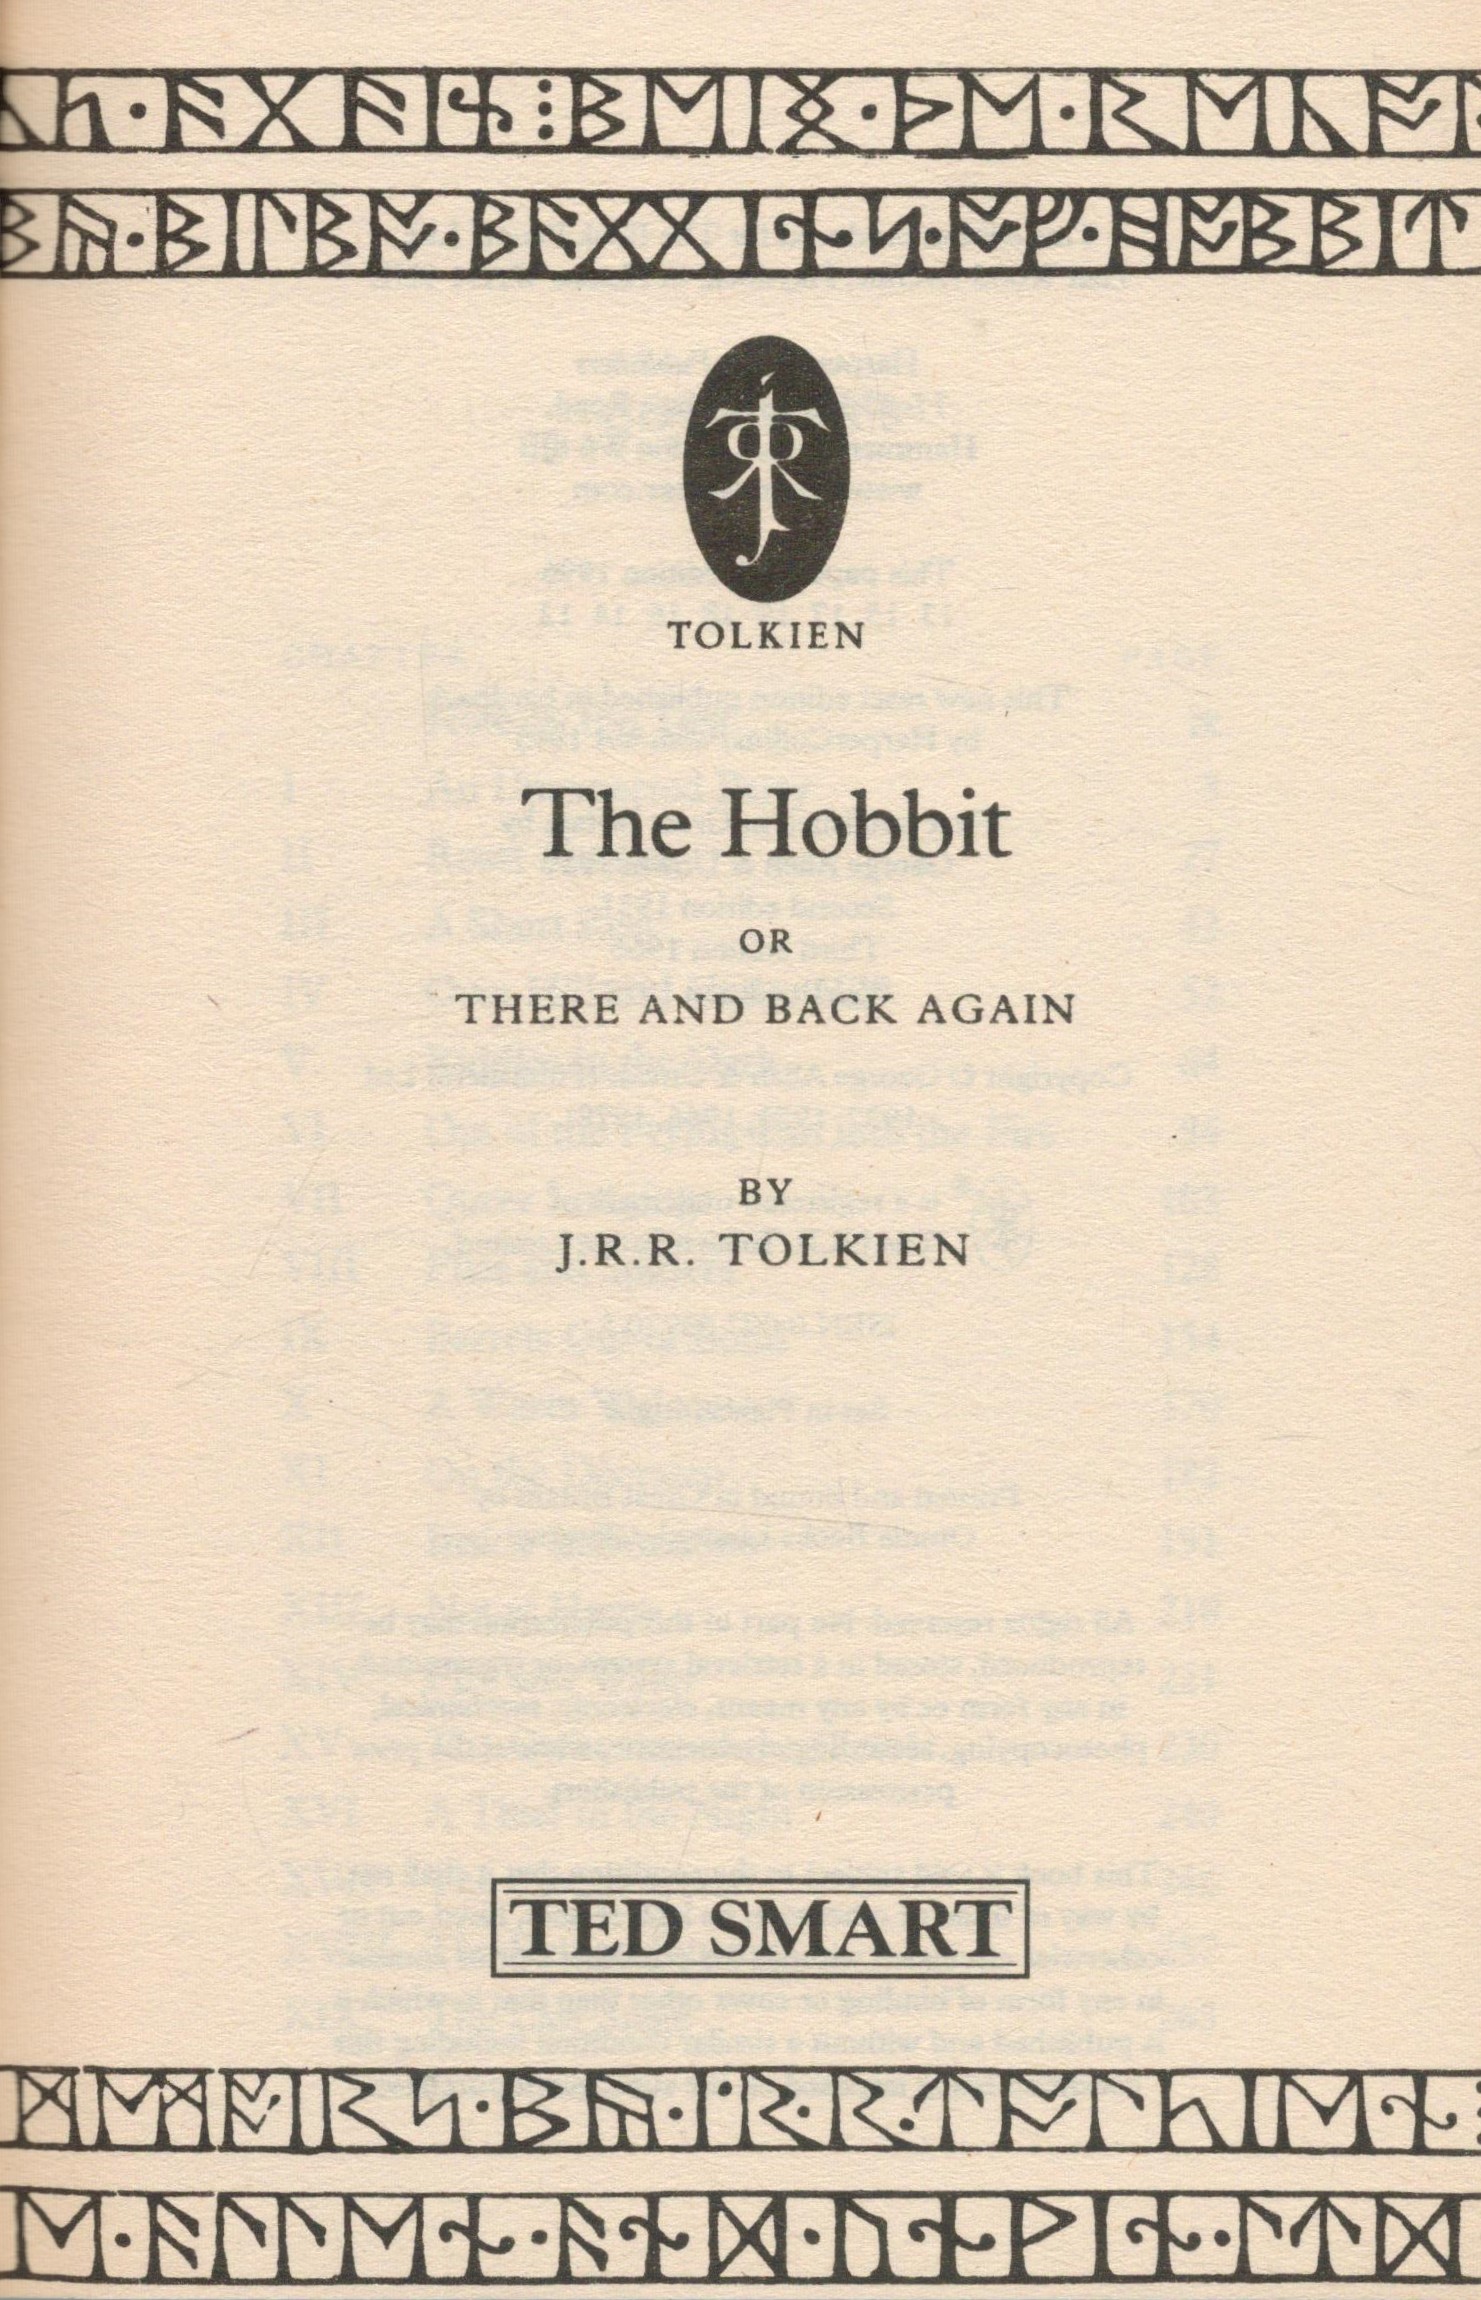 4 x Books The Hobbit and The Lord Of The Rings part 1, 2, 3, by J R R Tolkien 1996 New Edition - Image 3 of 4